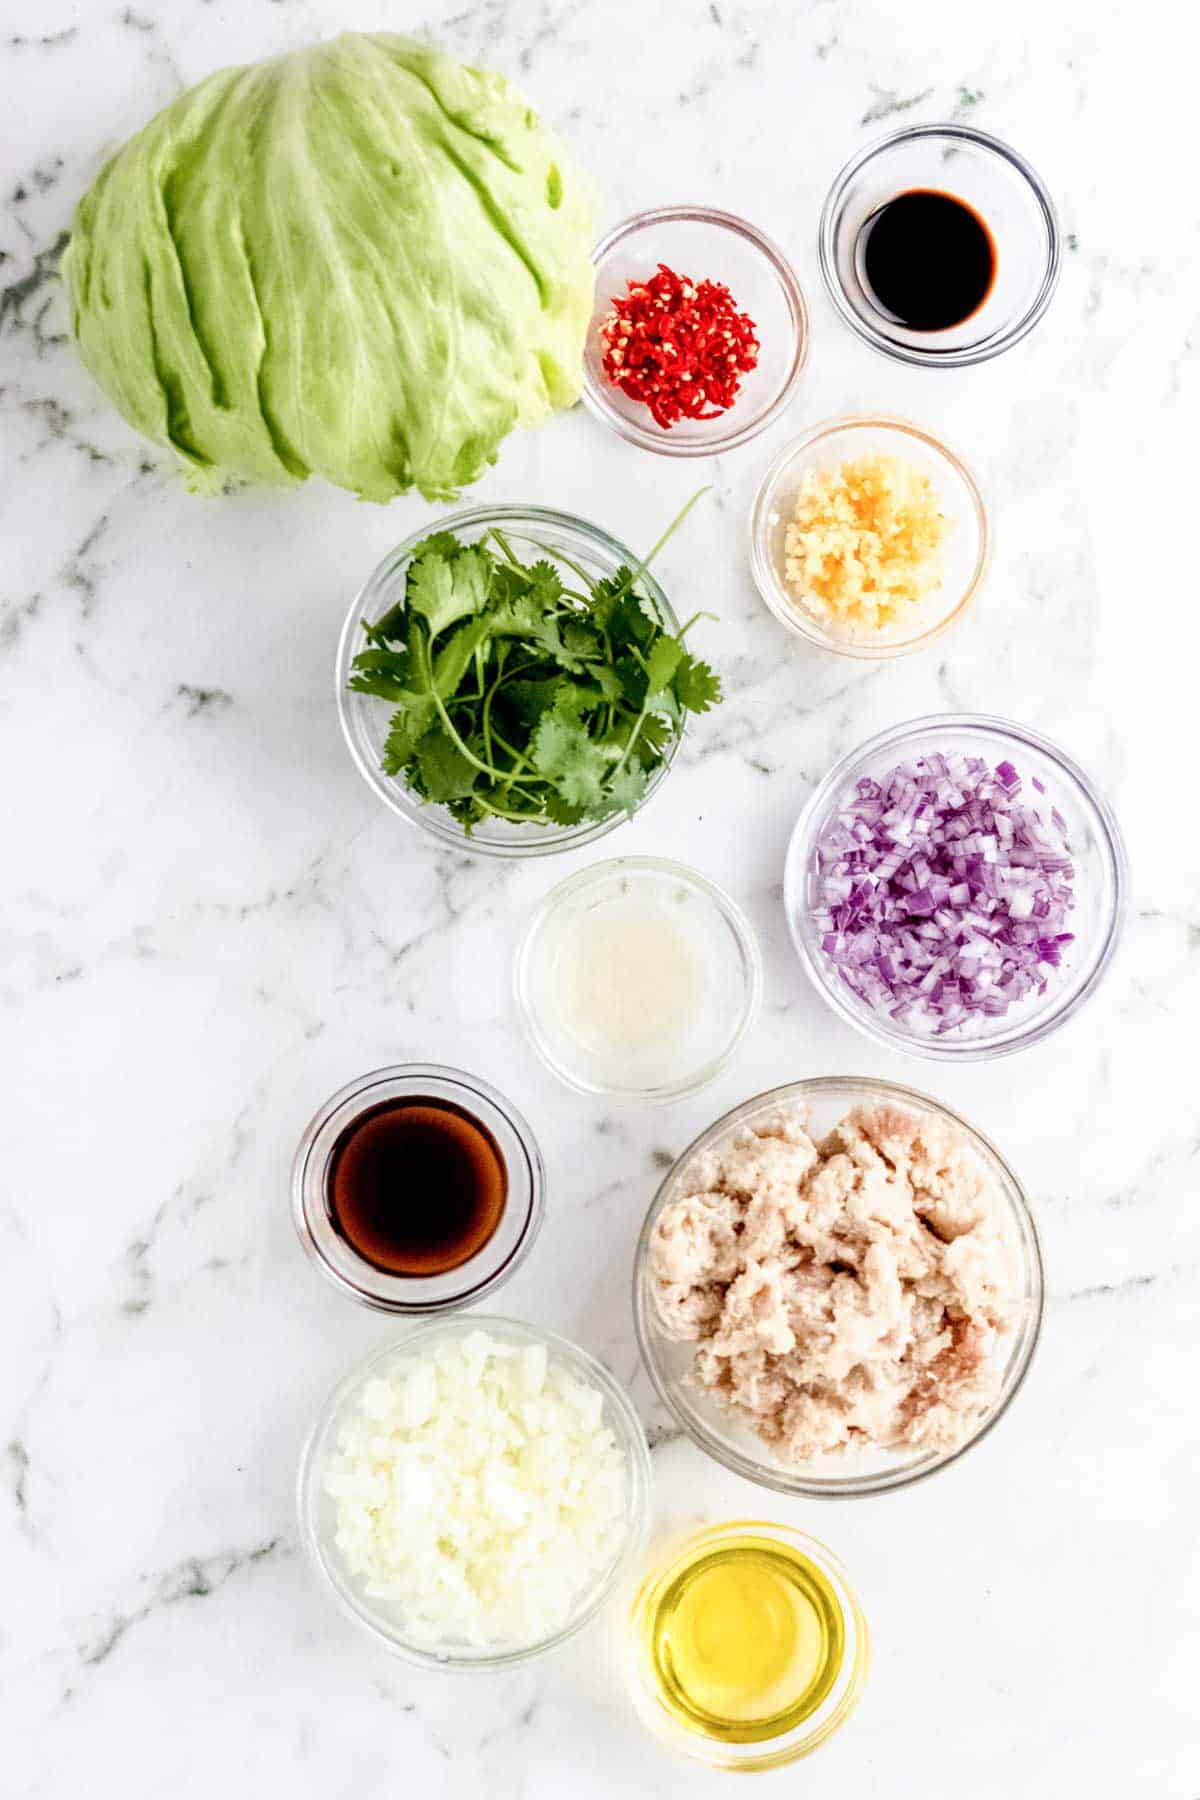 The ingredients for Thai larb chicken lettuce wraps.